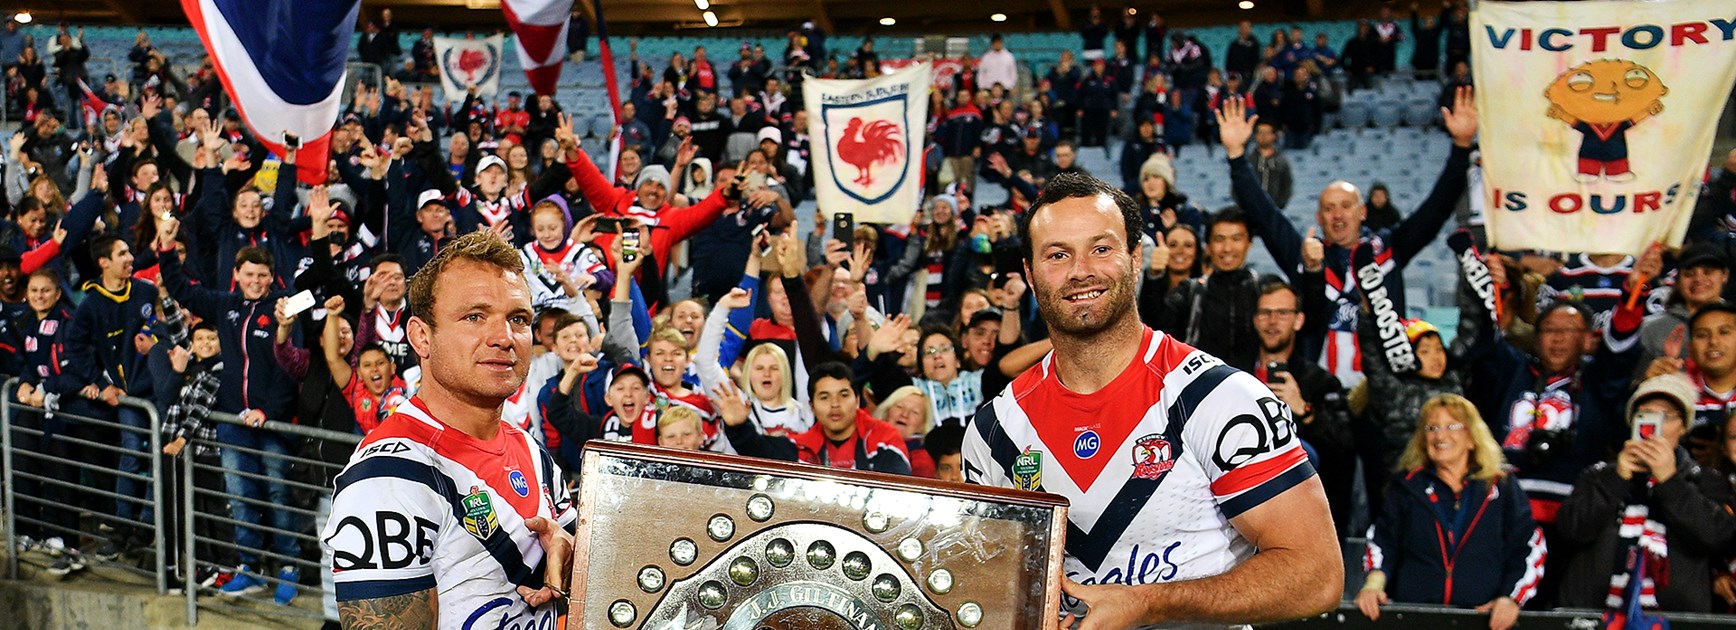 Roosters thrash Eels to clinch minor premiership